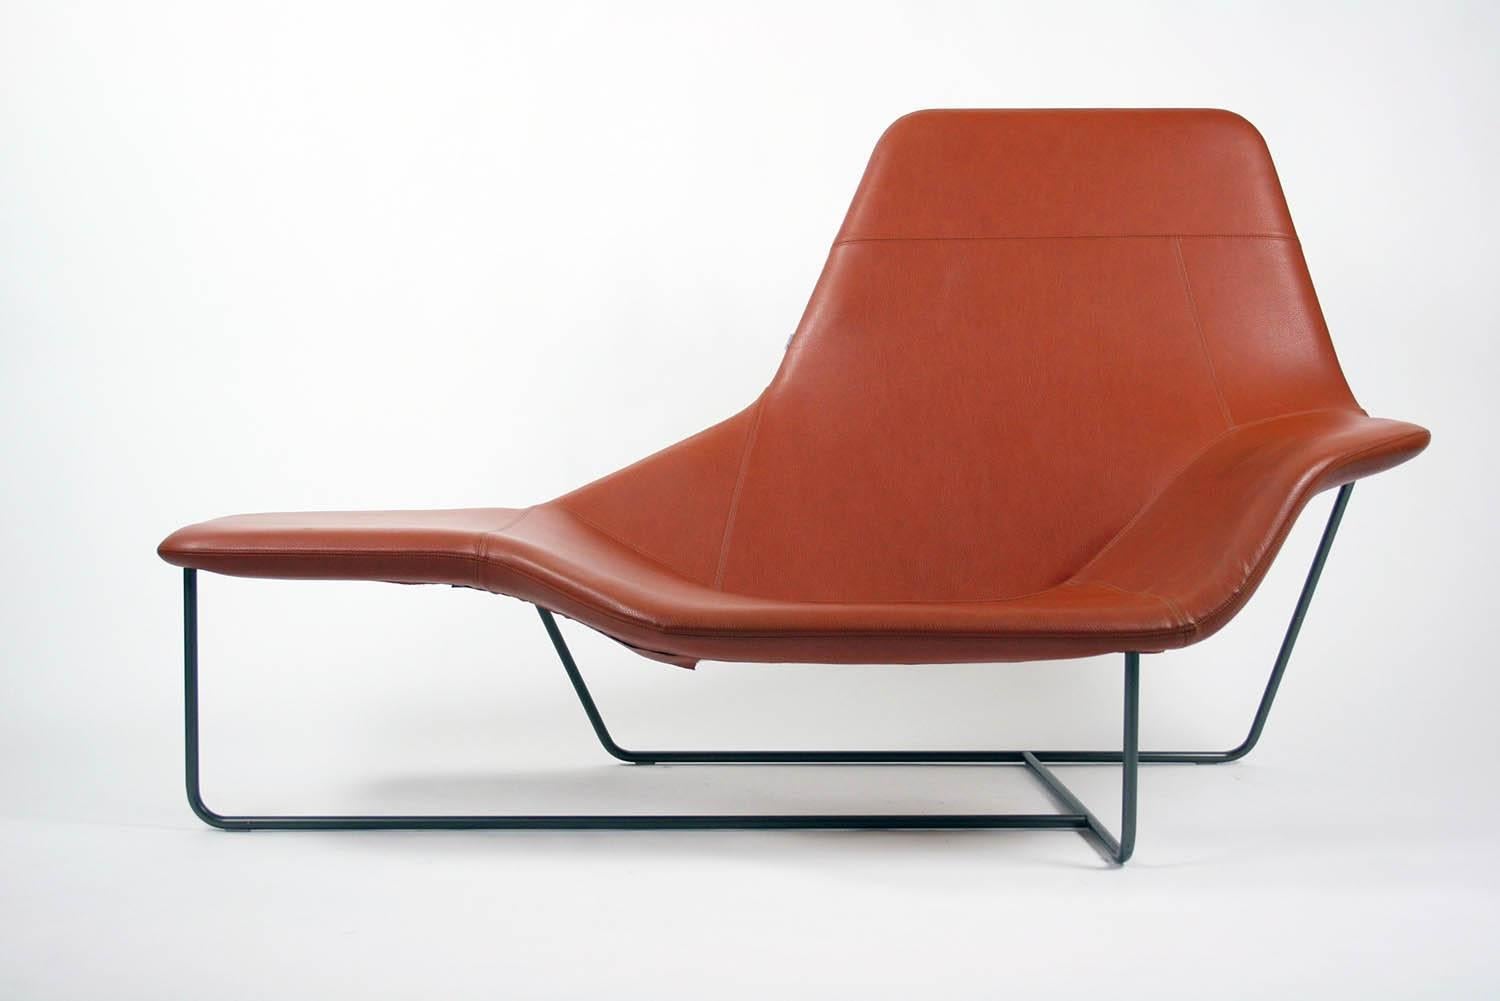 Lama chaise longue chair designed by Ludovica and Roberto Palomba for Zanotta, Italy in 2006.